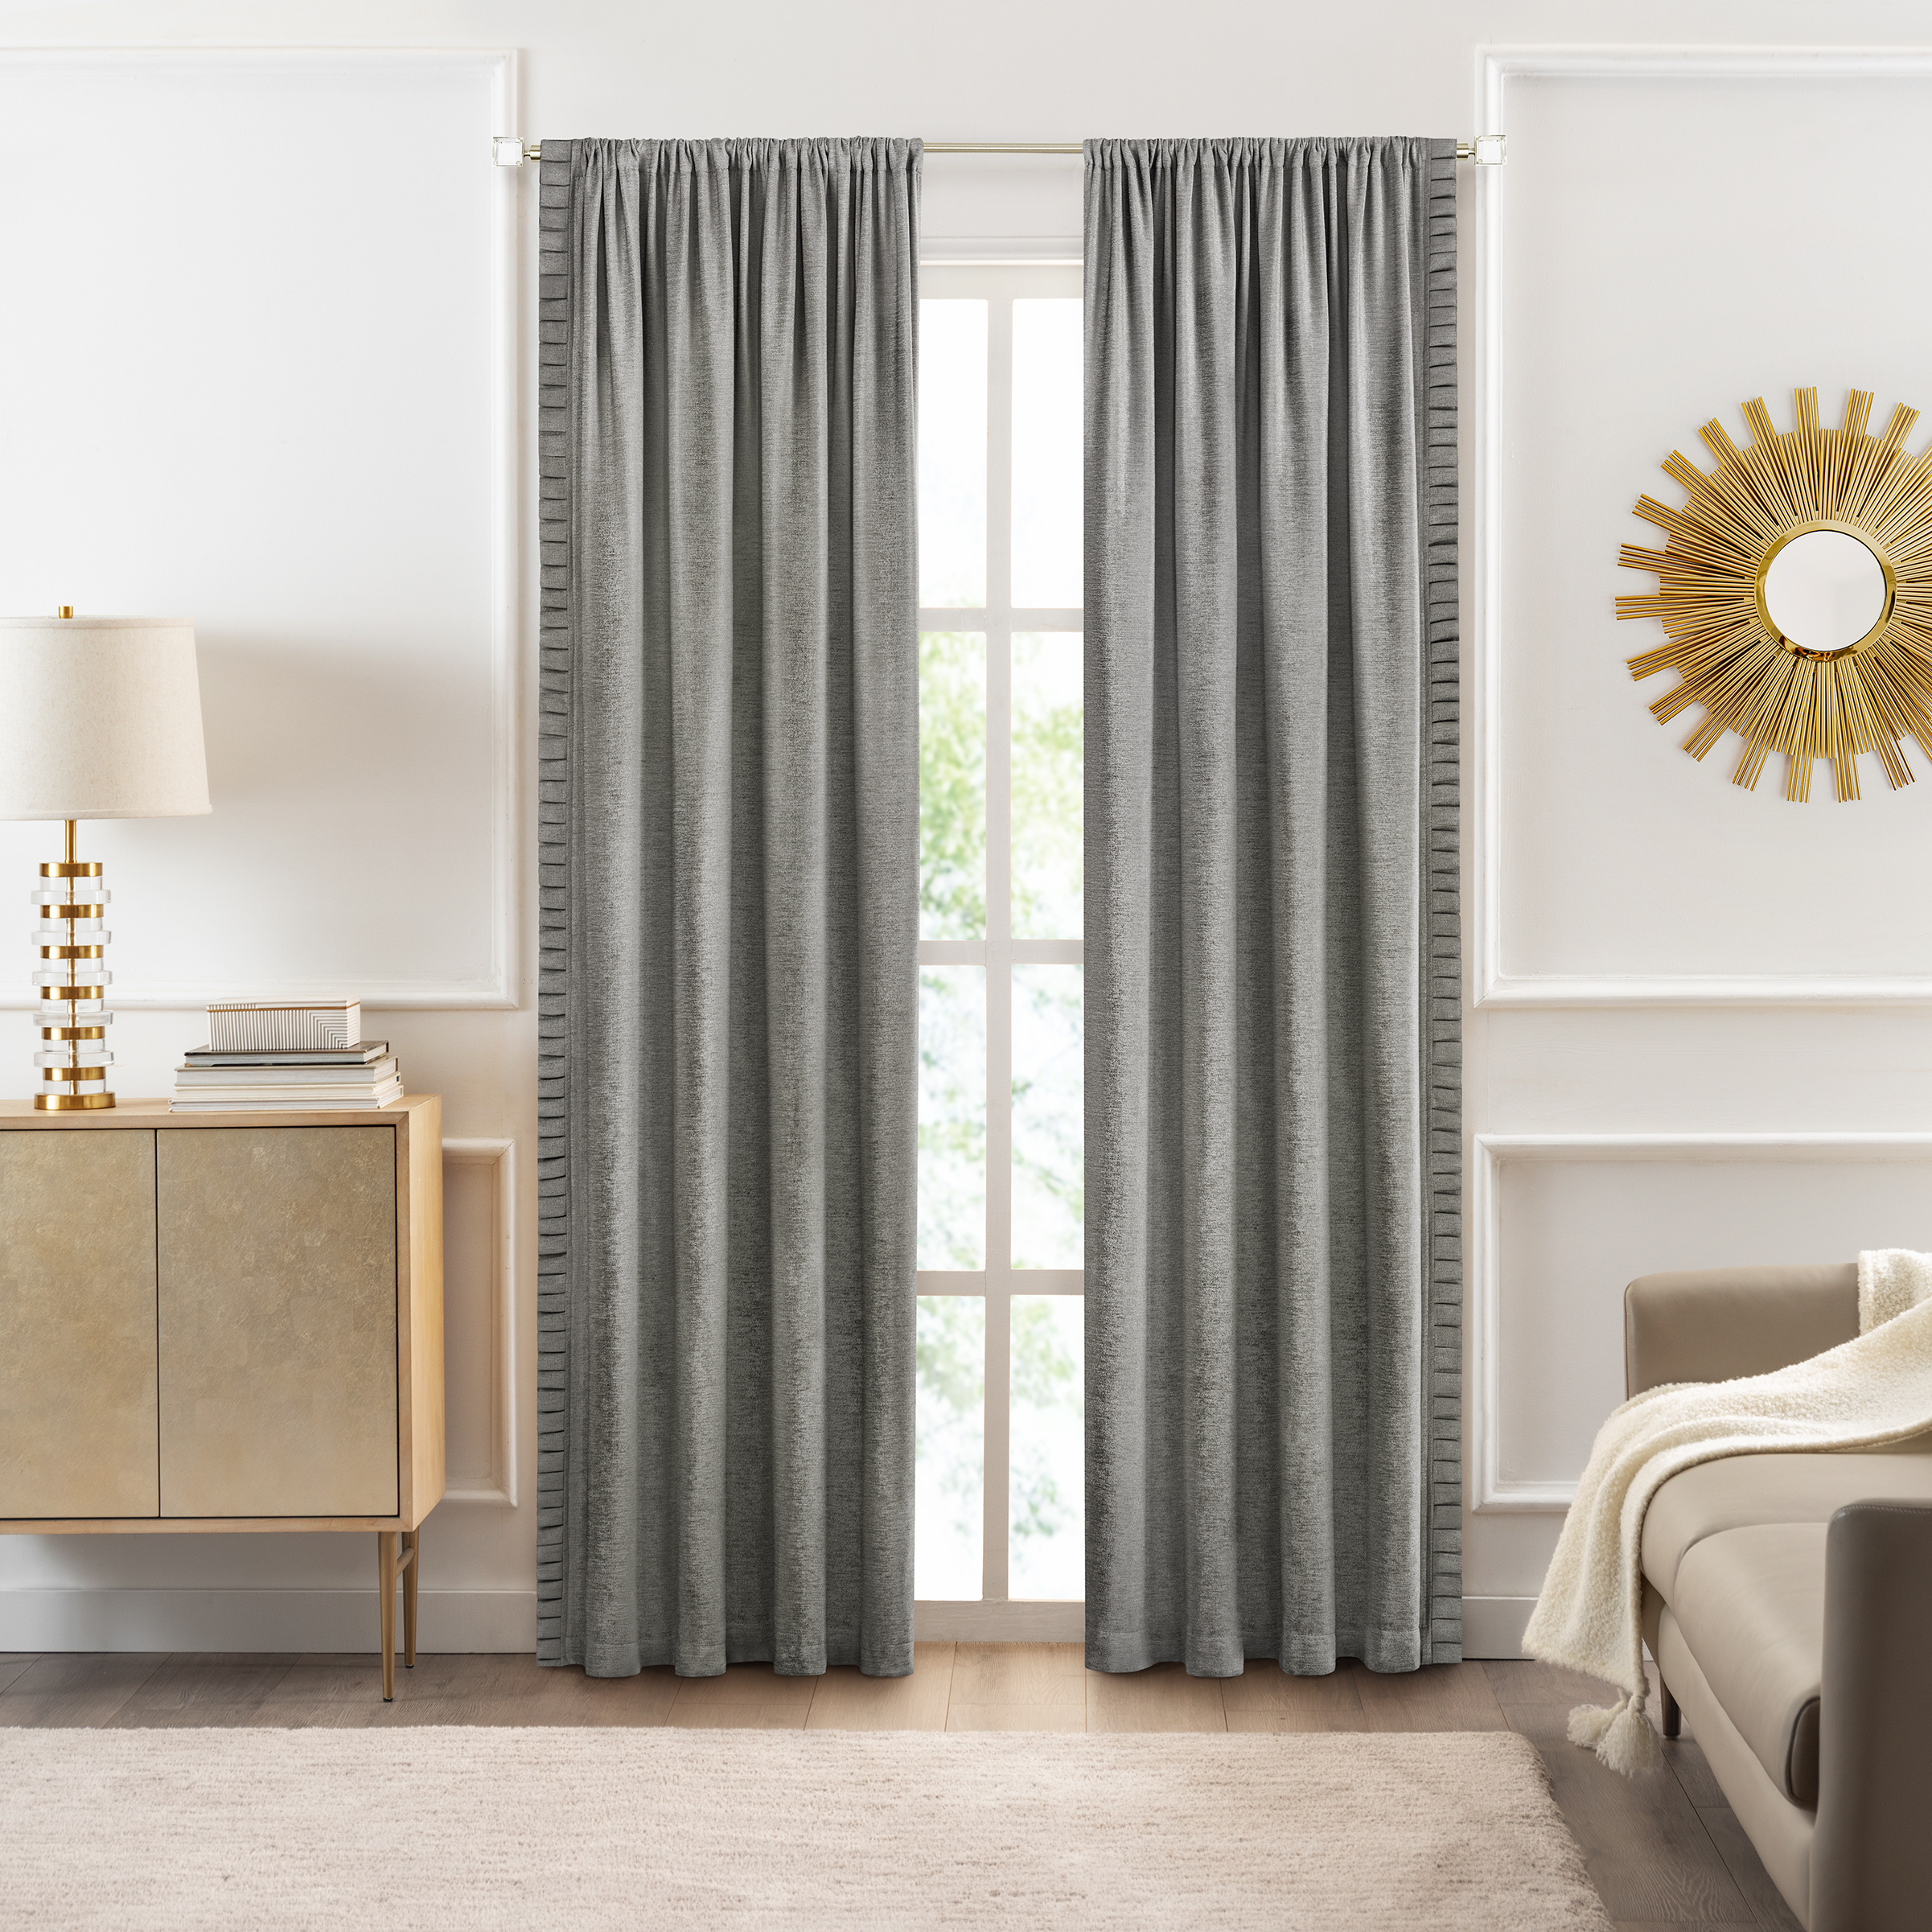 Achim Bordeaux Indoor Polyester Light Filtering Solid Curtain Panel, Silver, 52-in W x 63-in L - image 1 of 7